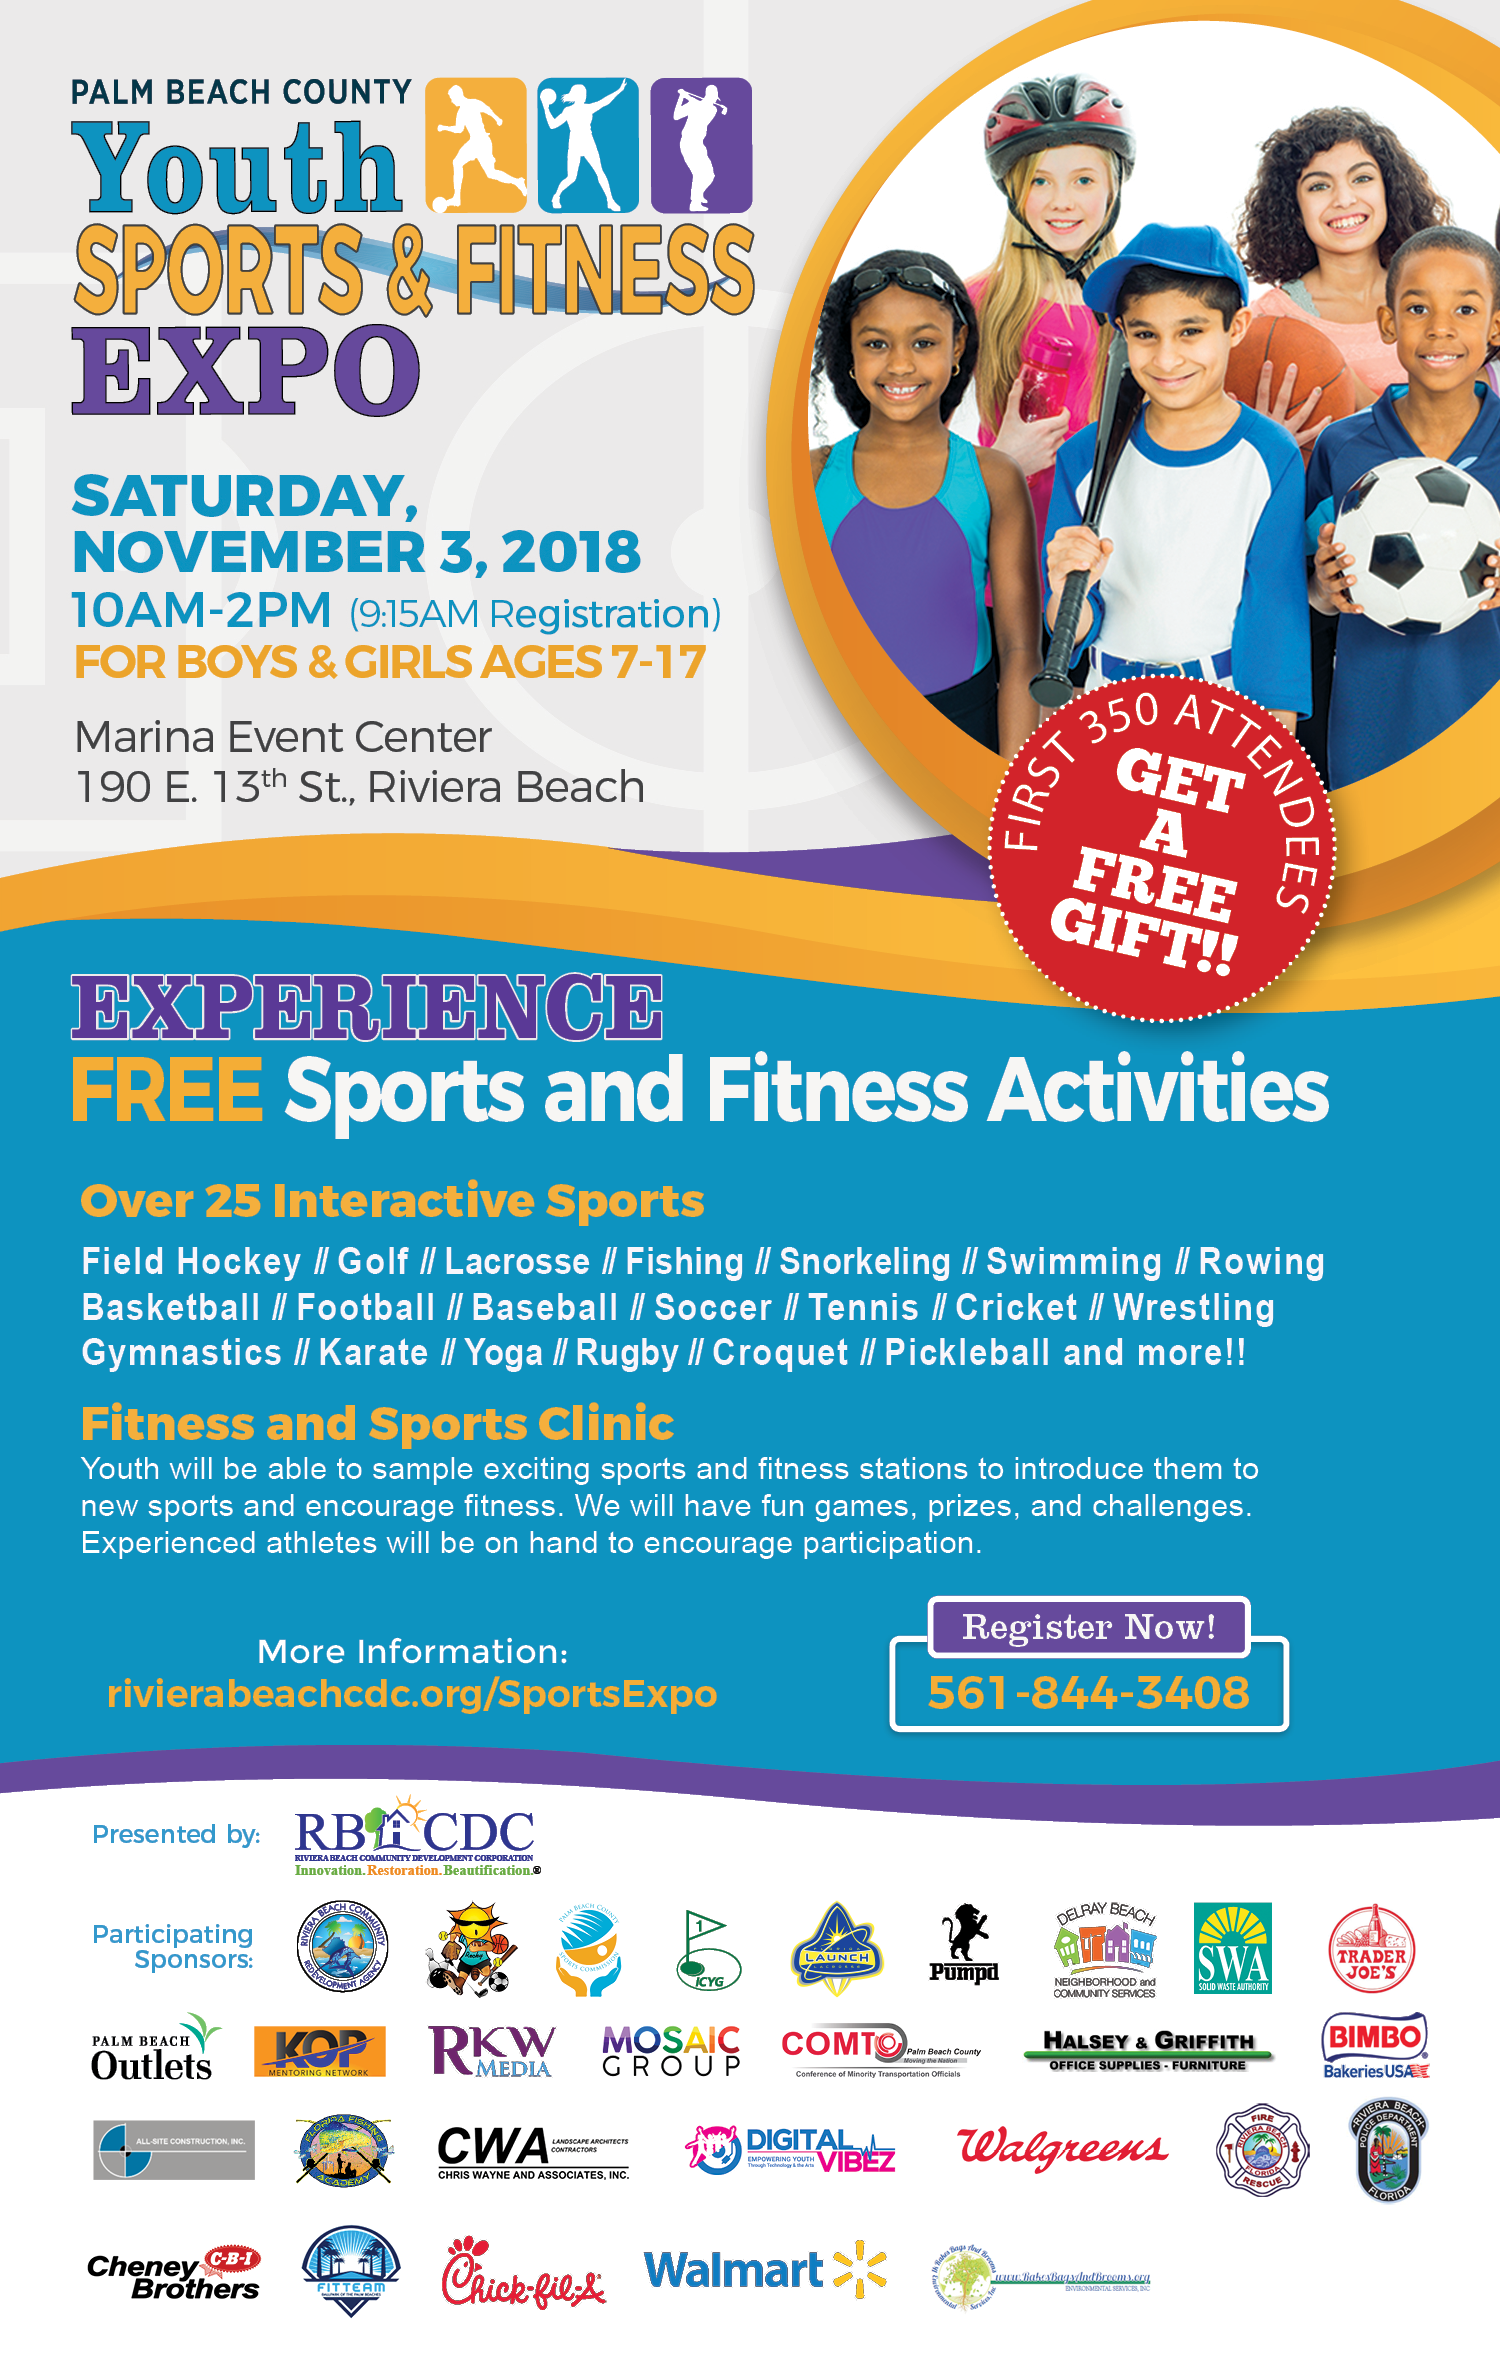 rbcdc-youth-sports-expo-v5